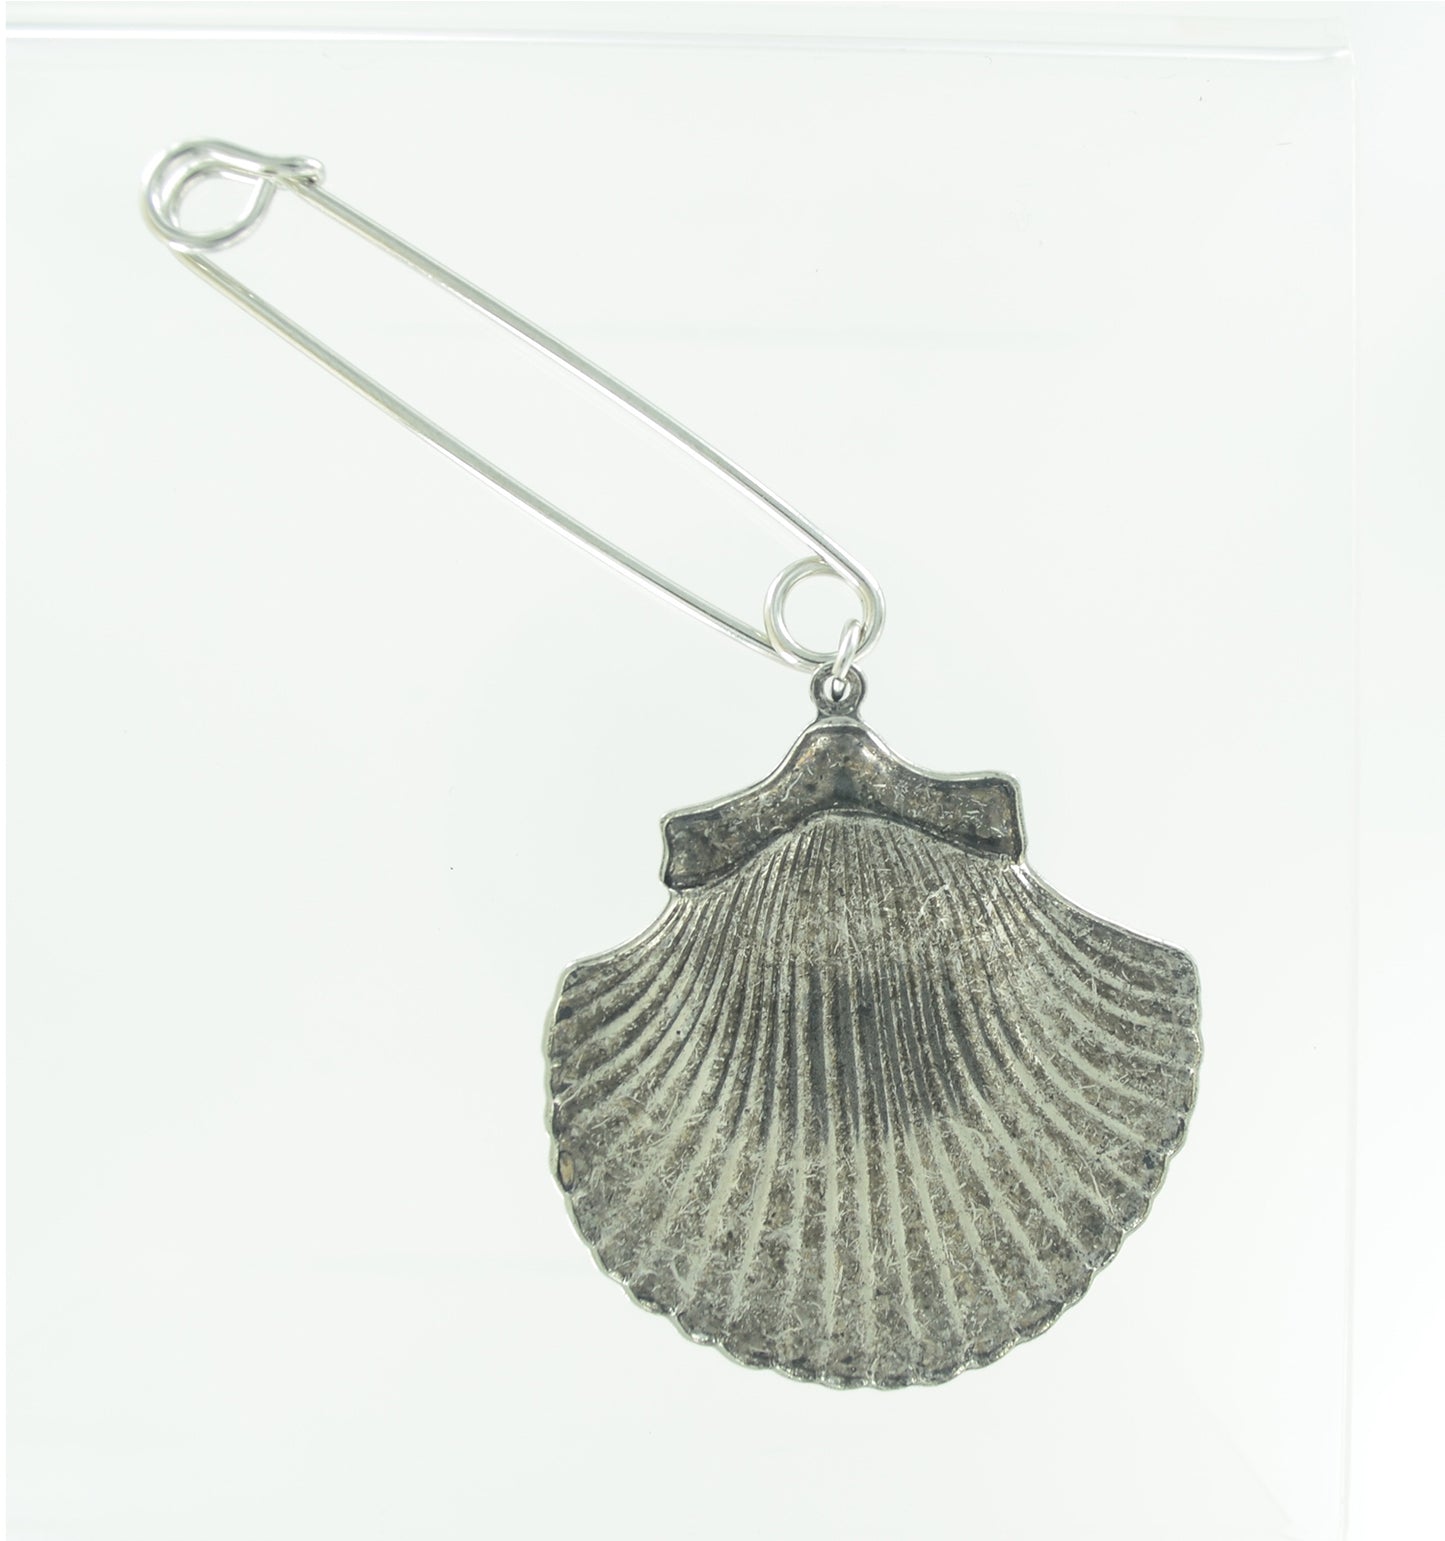 Safety Pin Brooch Cockle Sea Shell End Charm Silver Tone USA Made 2"